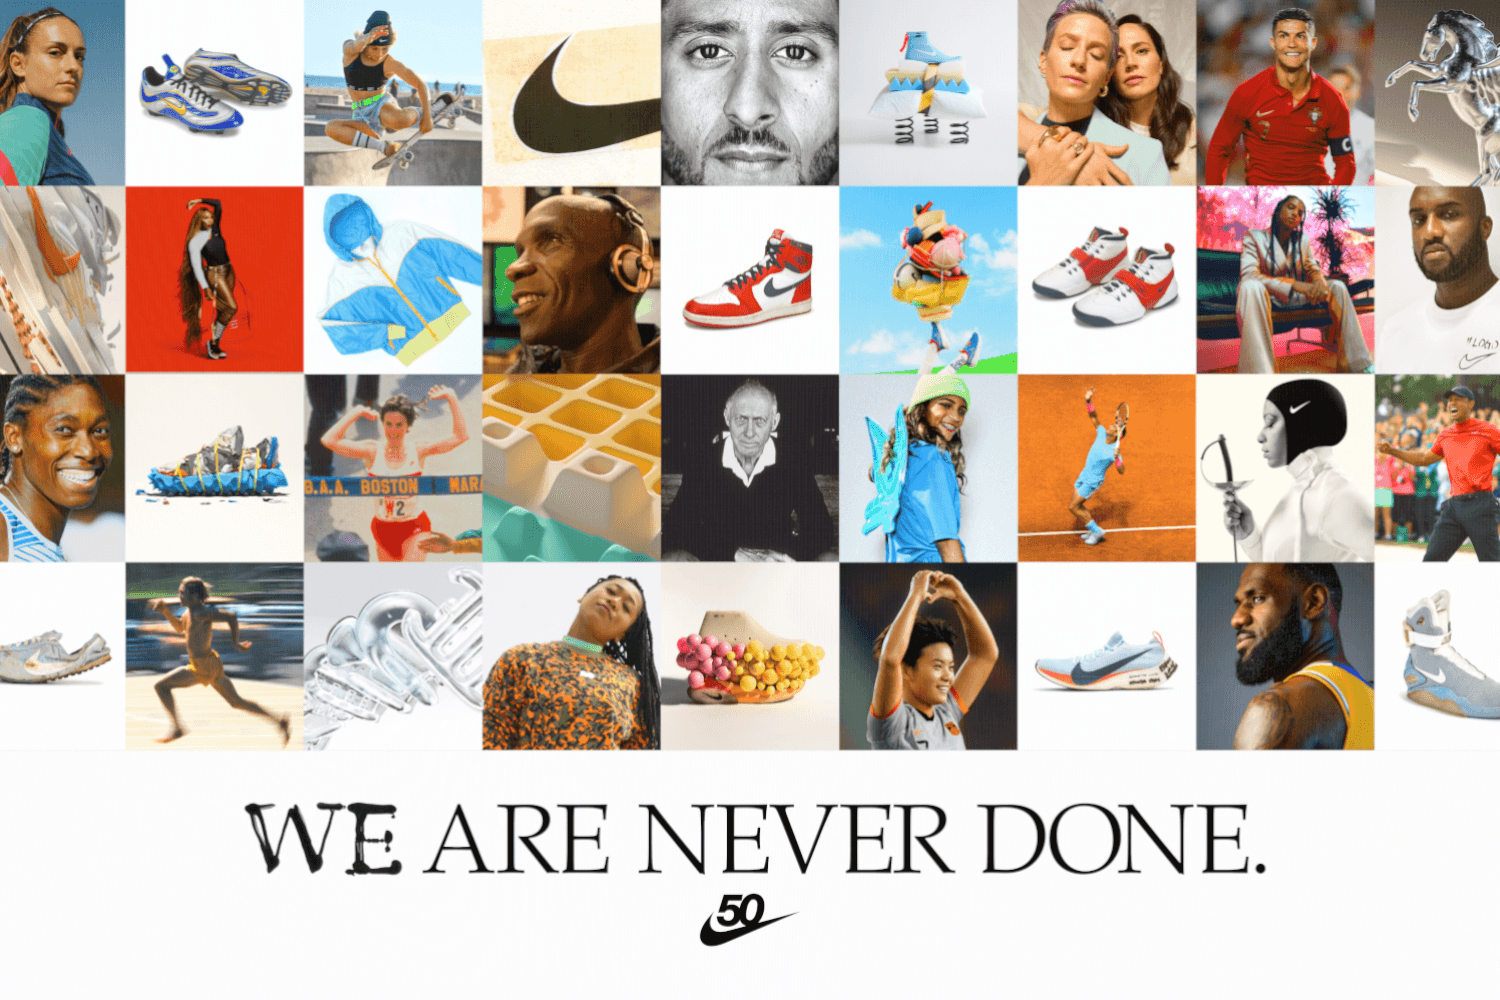 5 days of celebration with Nike's 50th anniversary